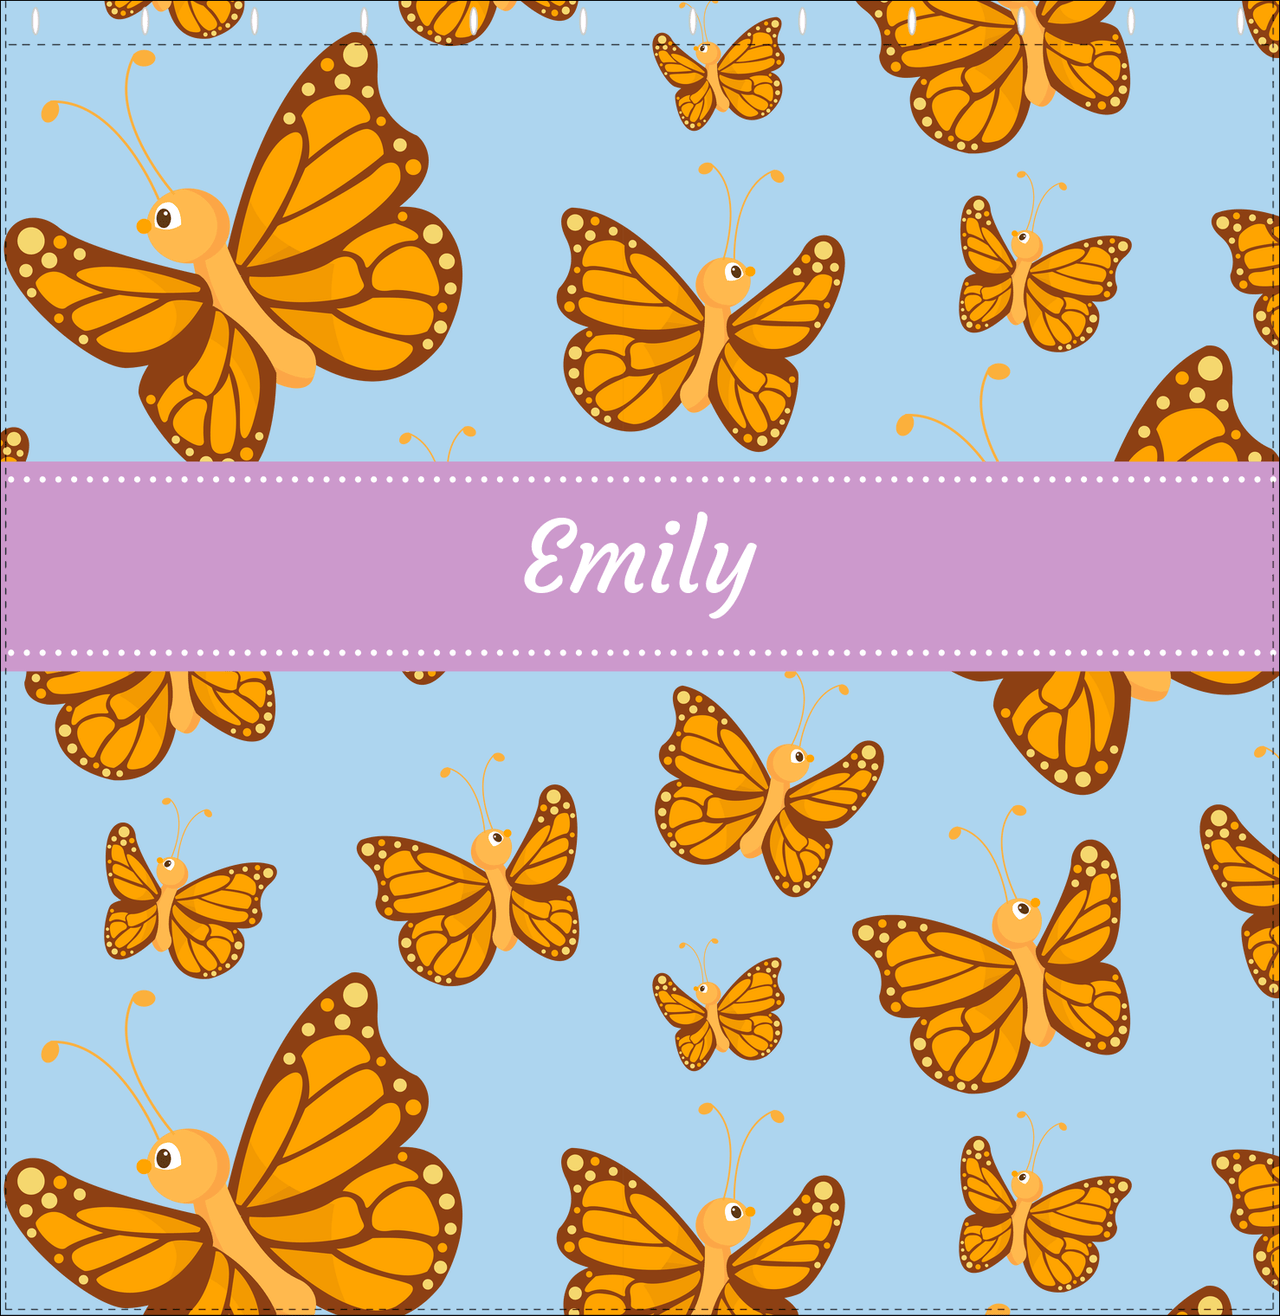 Personalized Butterfly Shower Curtain I - Blue Background - Orange Butterflies - Decorate View